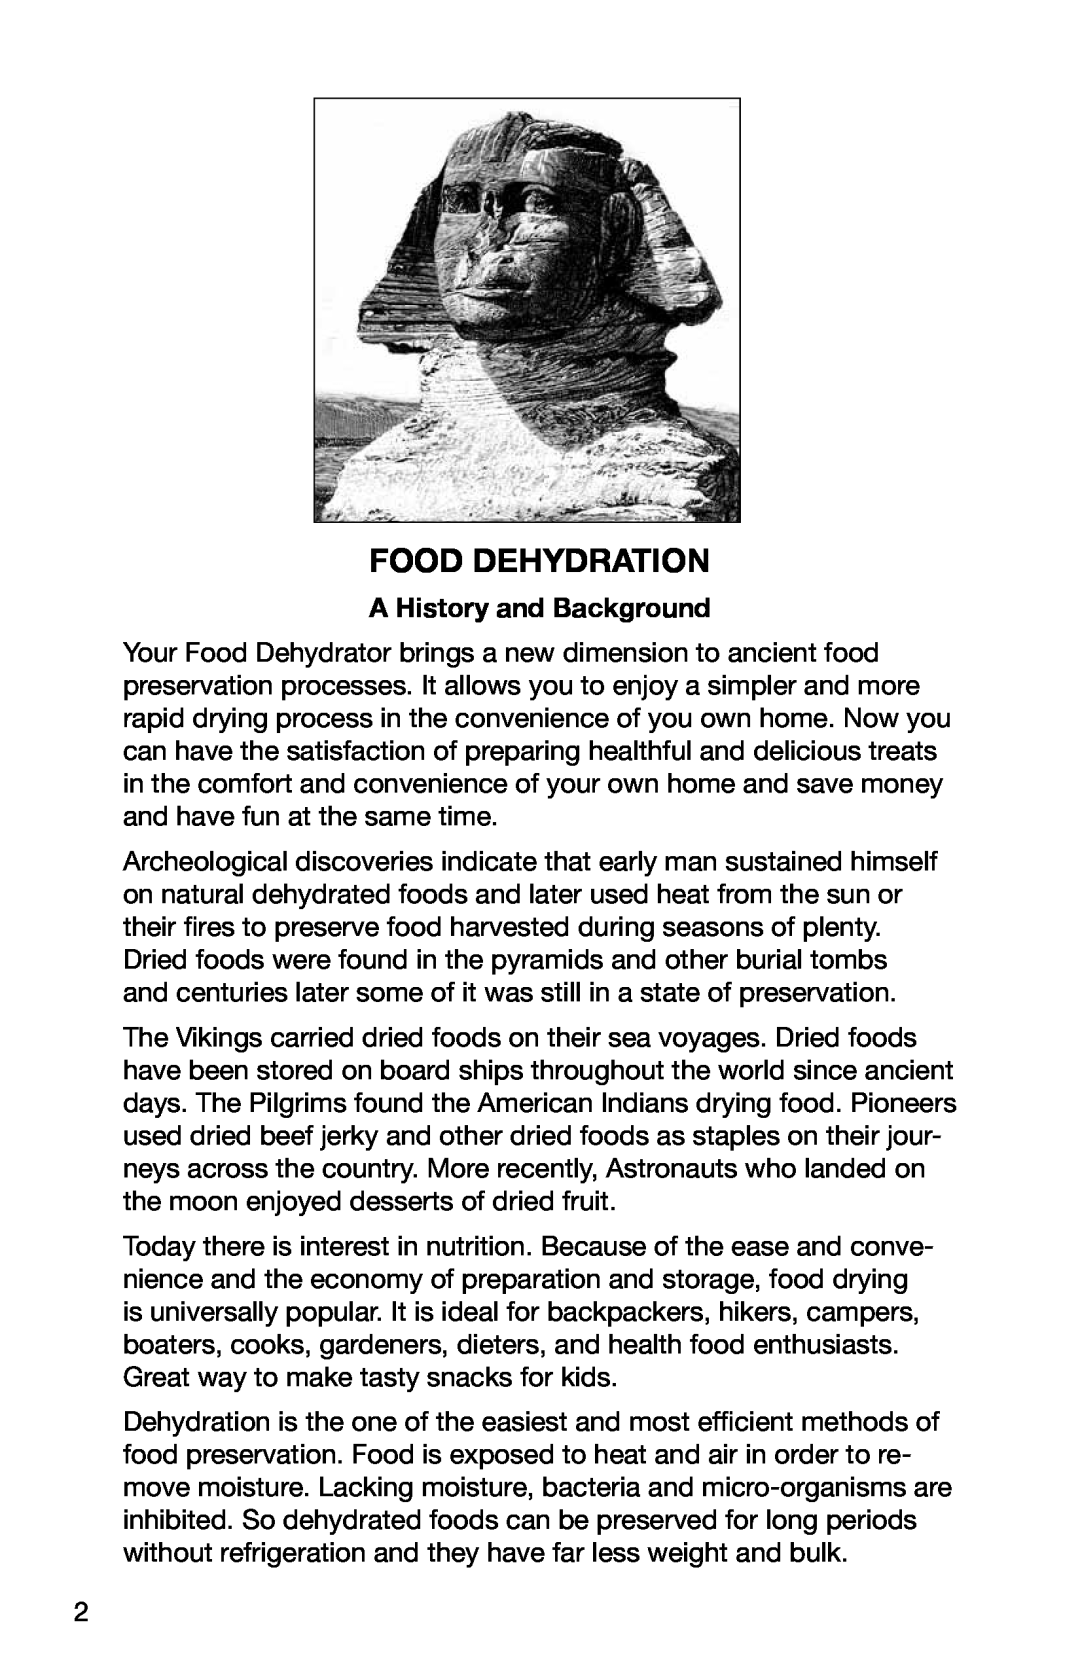 Ronco Food Saver manual Food Dehydration, A History and Background 